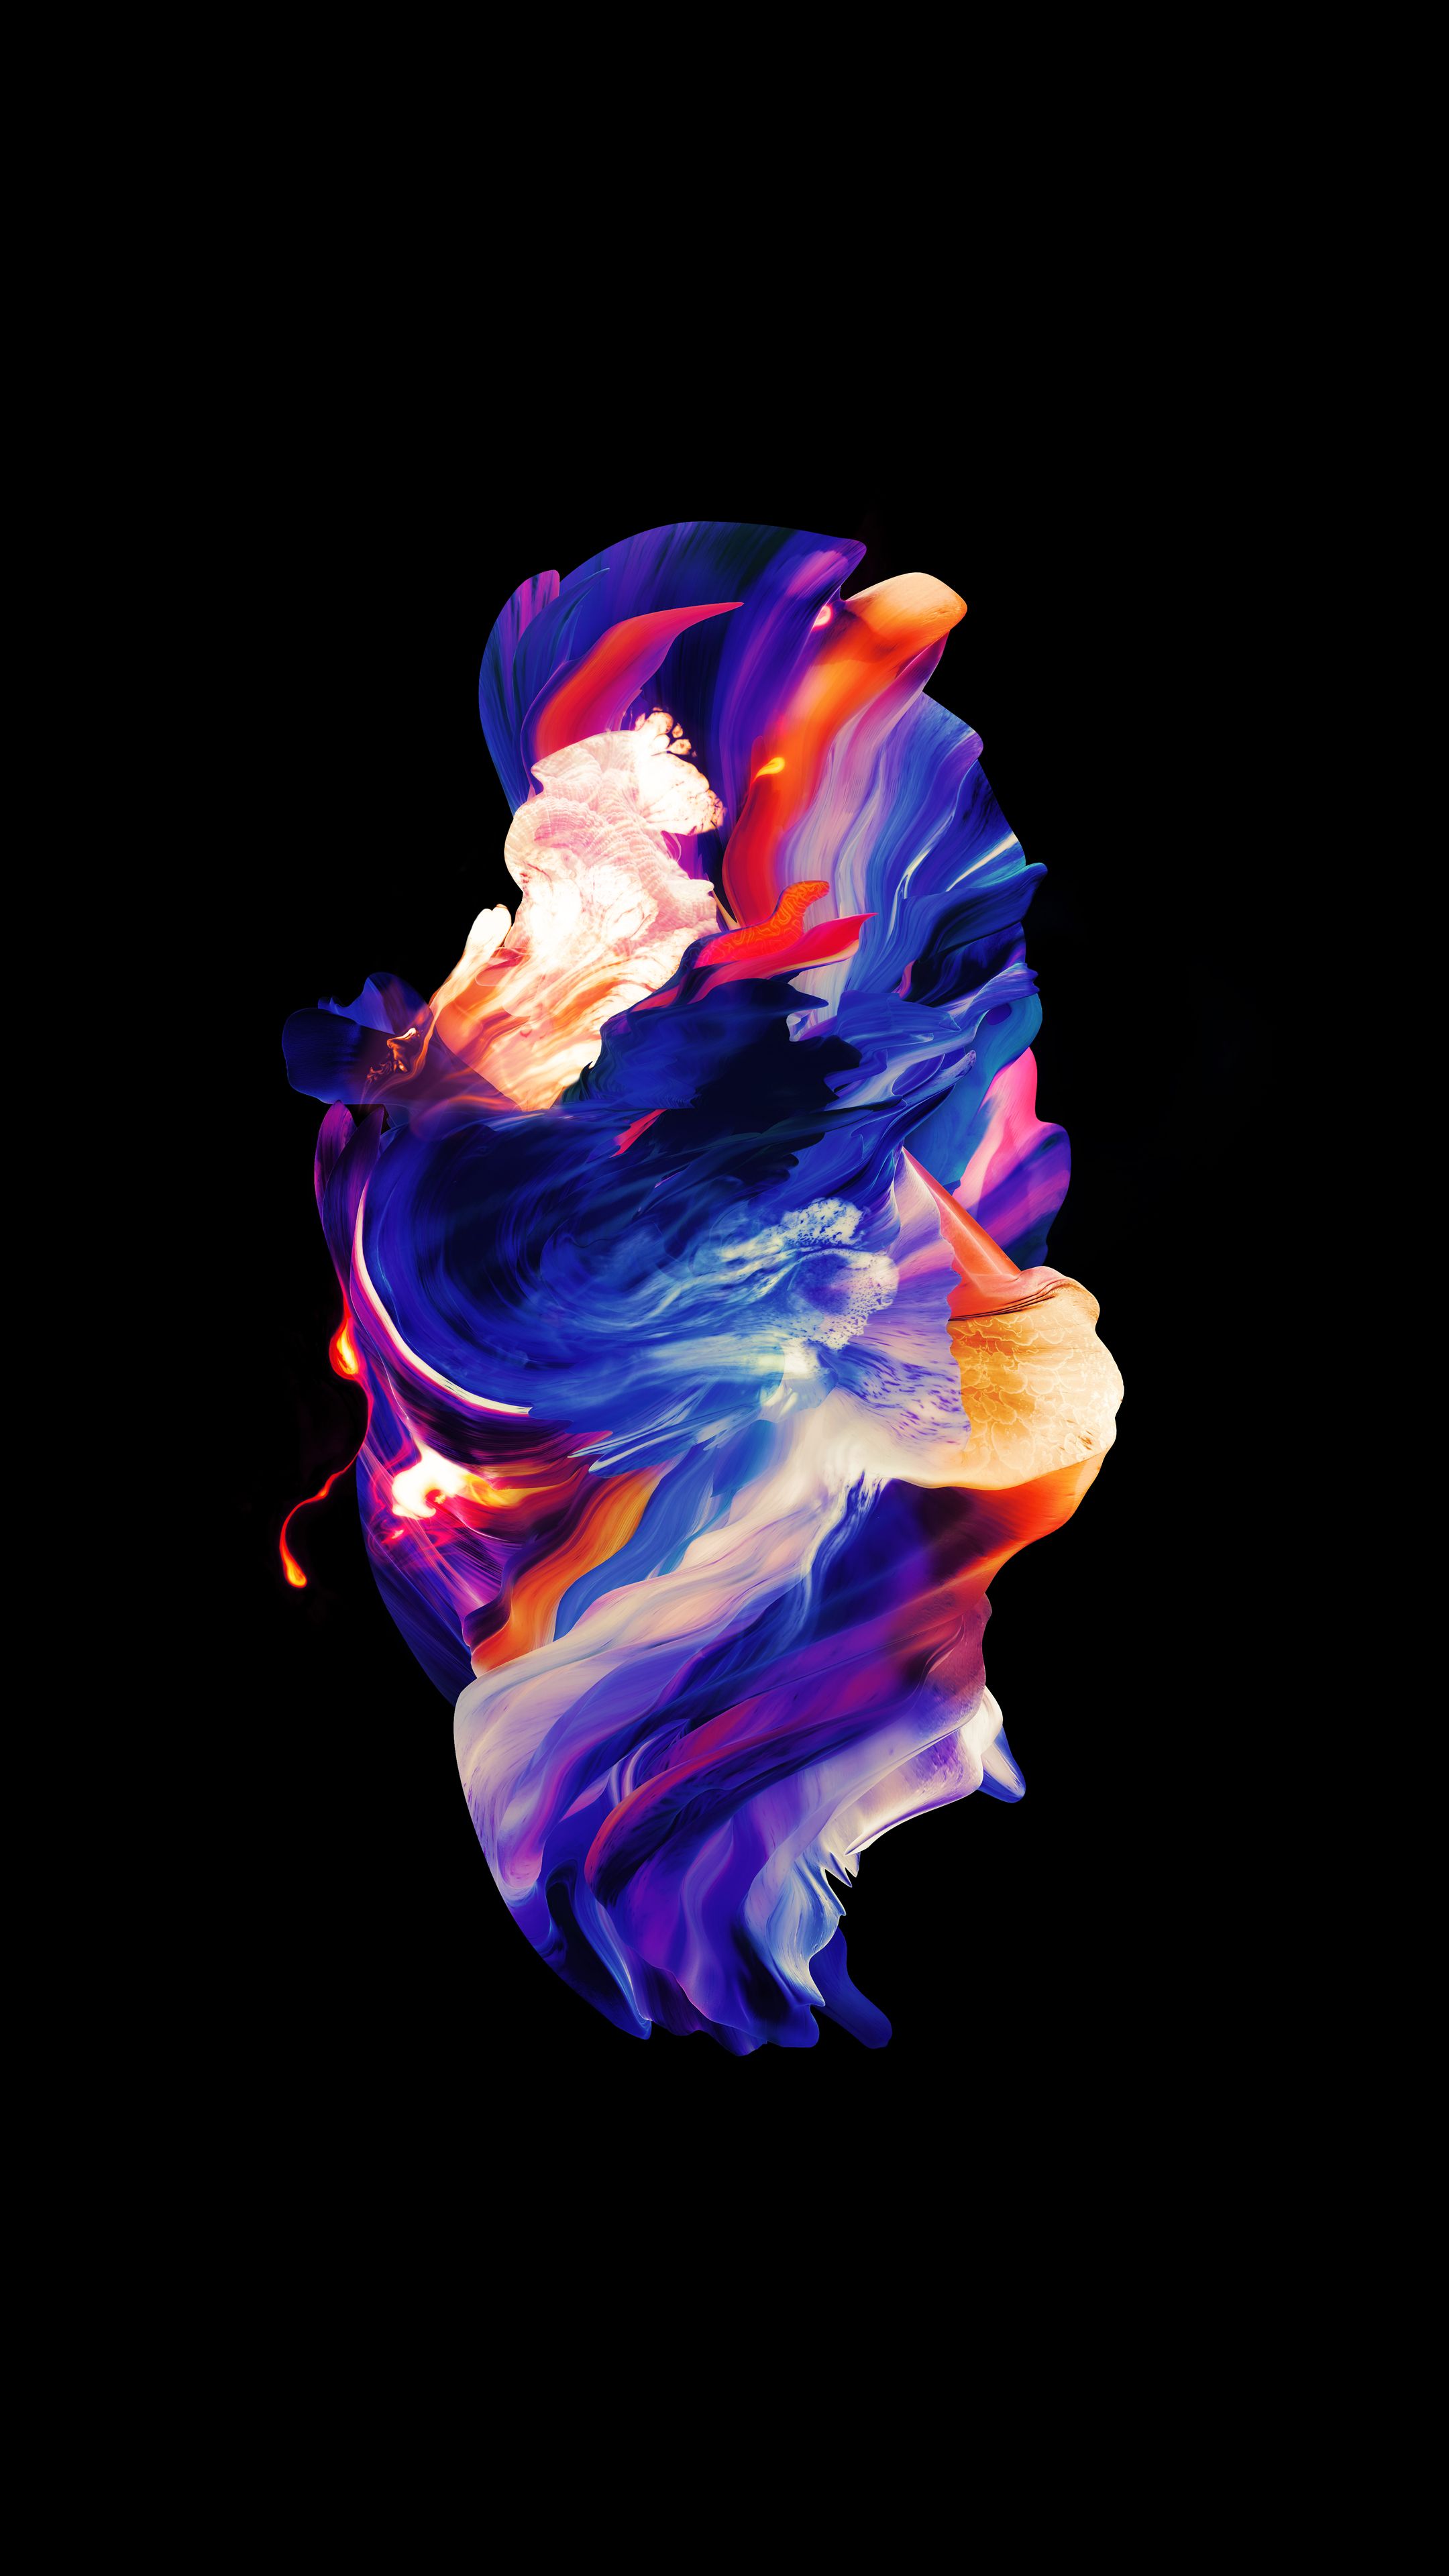 Best Oled Wallpapers